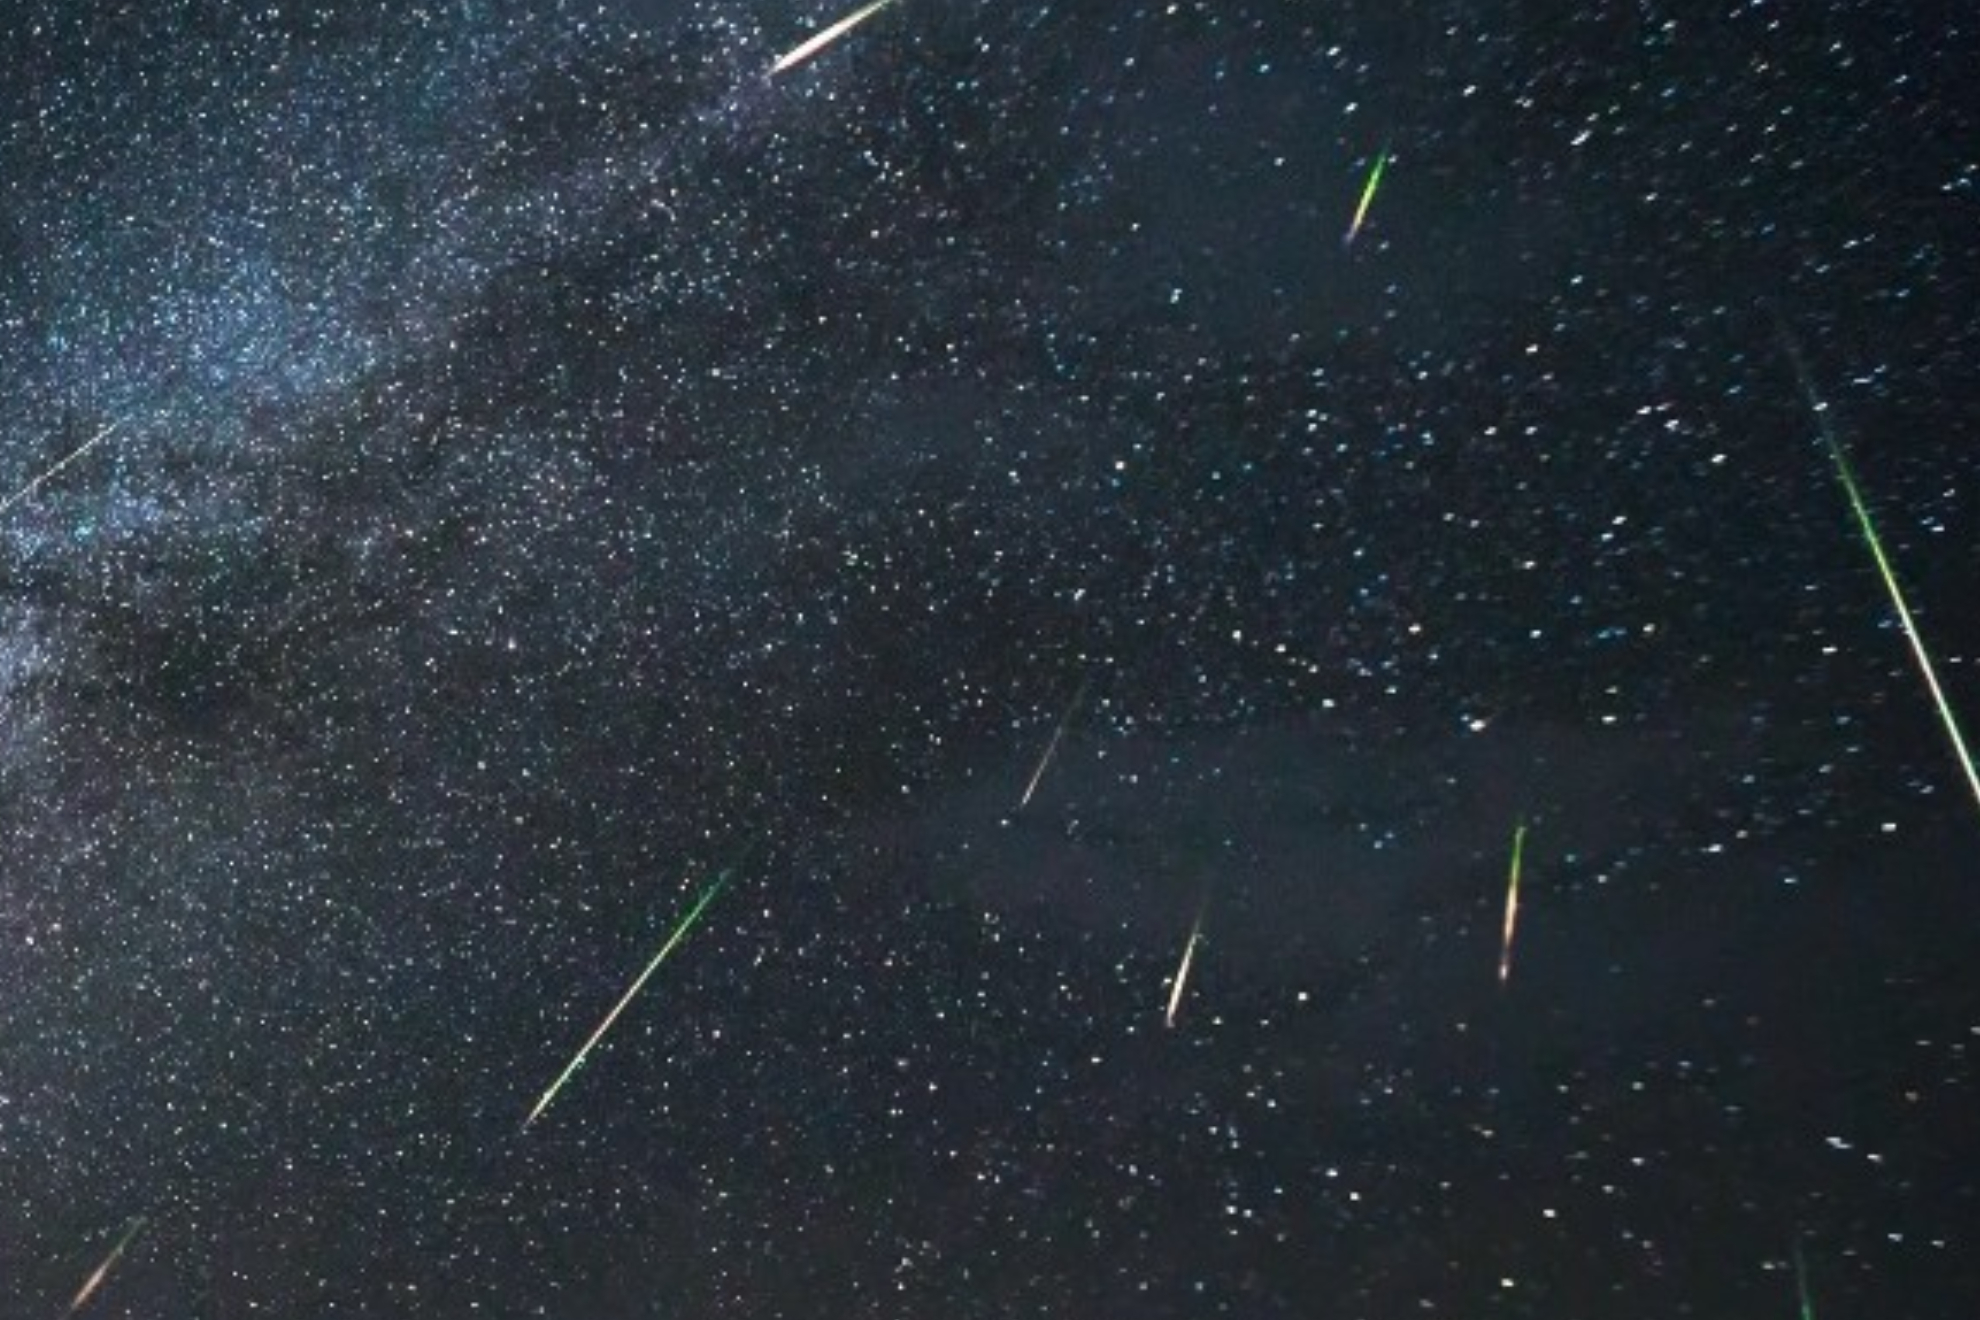 When is the next meteor shower?